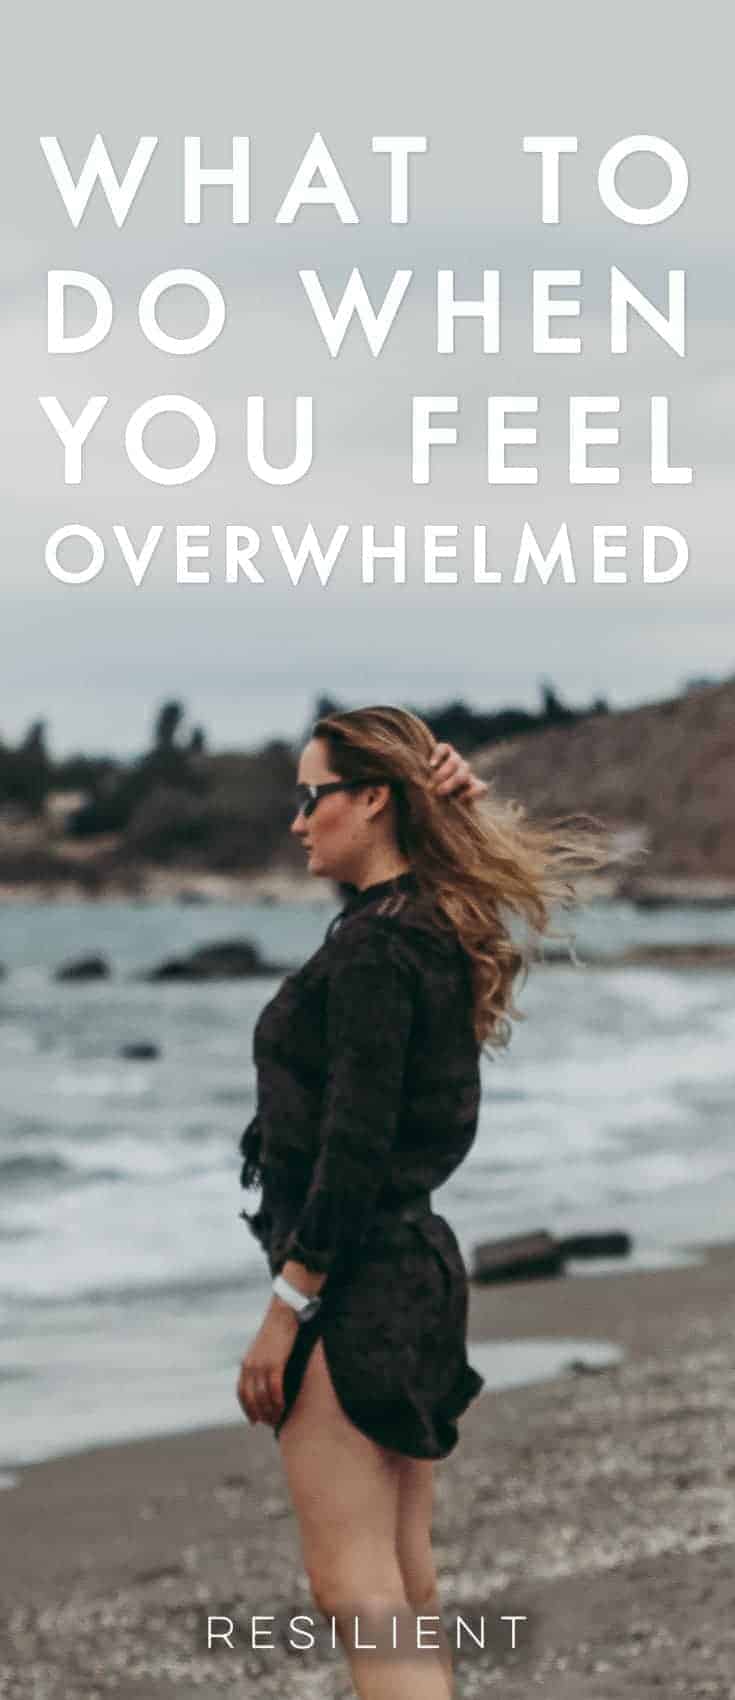 What to Do When You Feel Overwhelmed